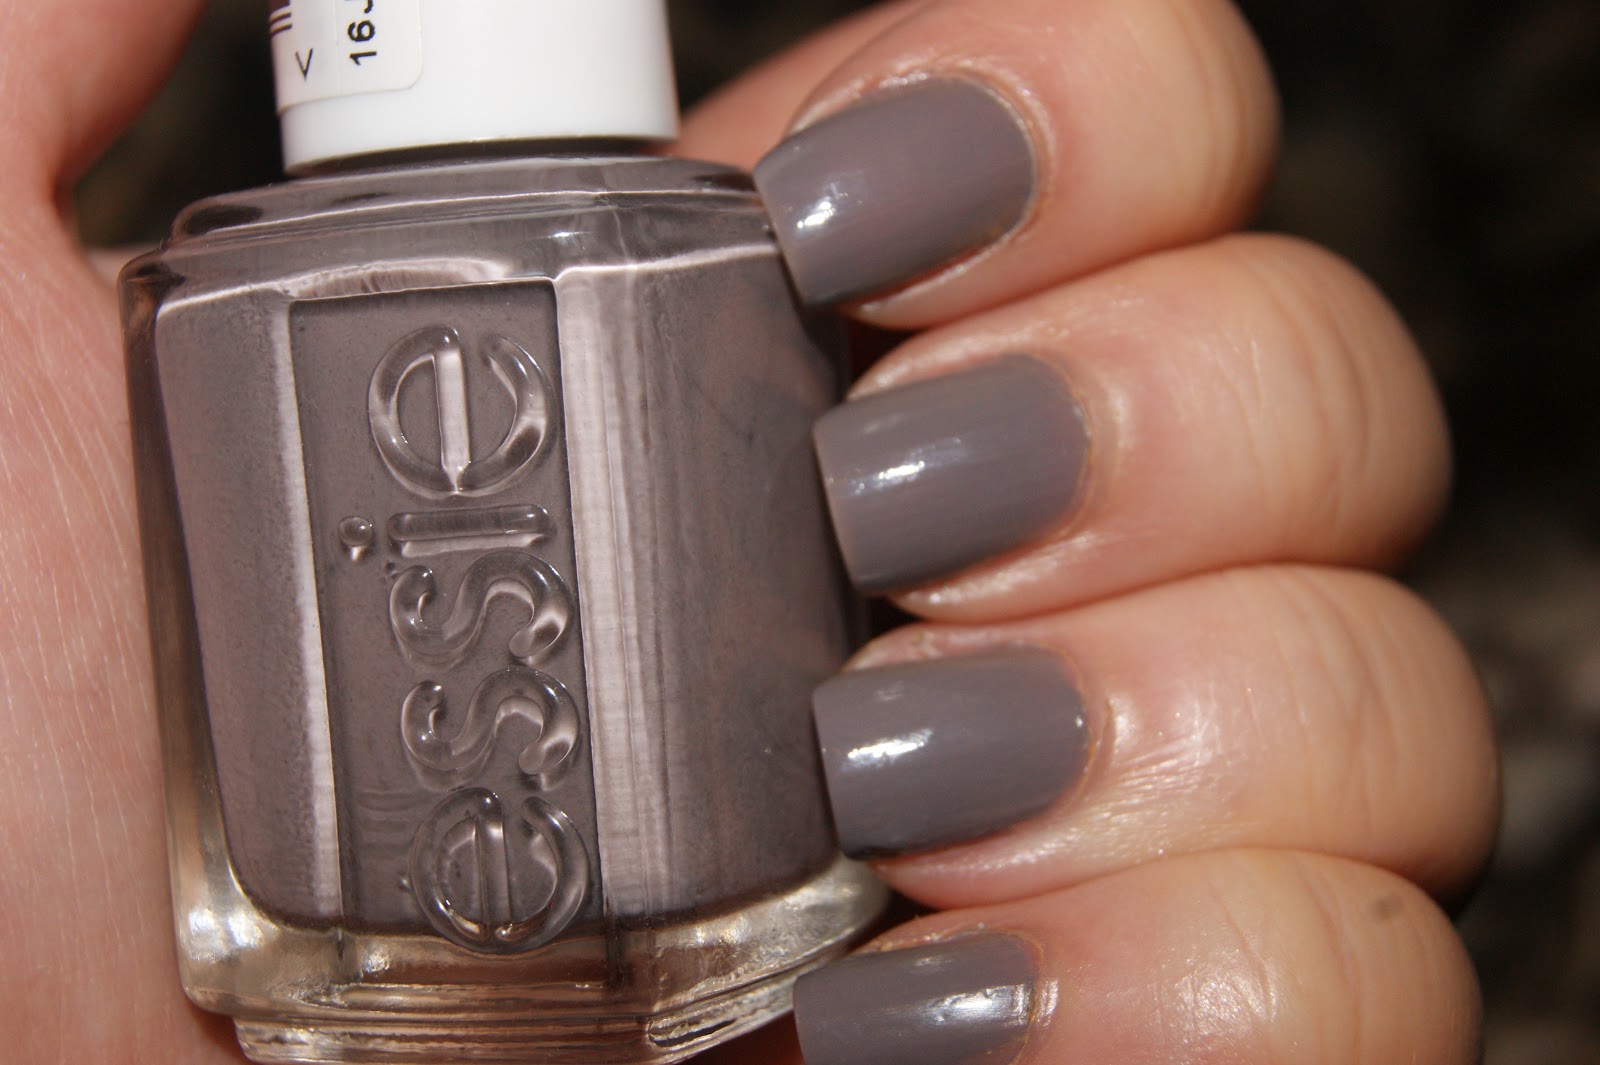 1. Essie Nail Polish in "Chinchilly" - wide 8